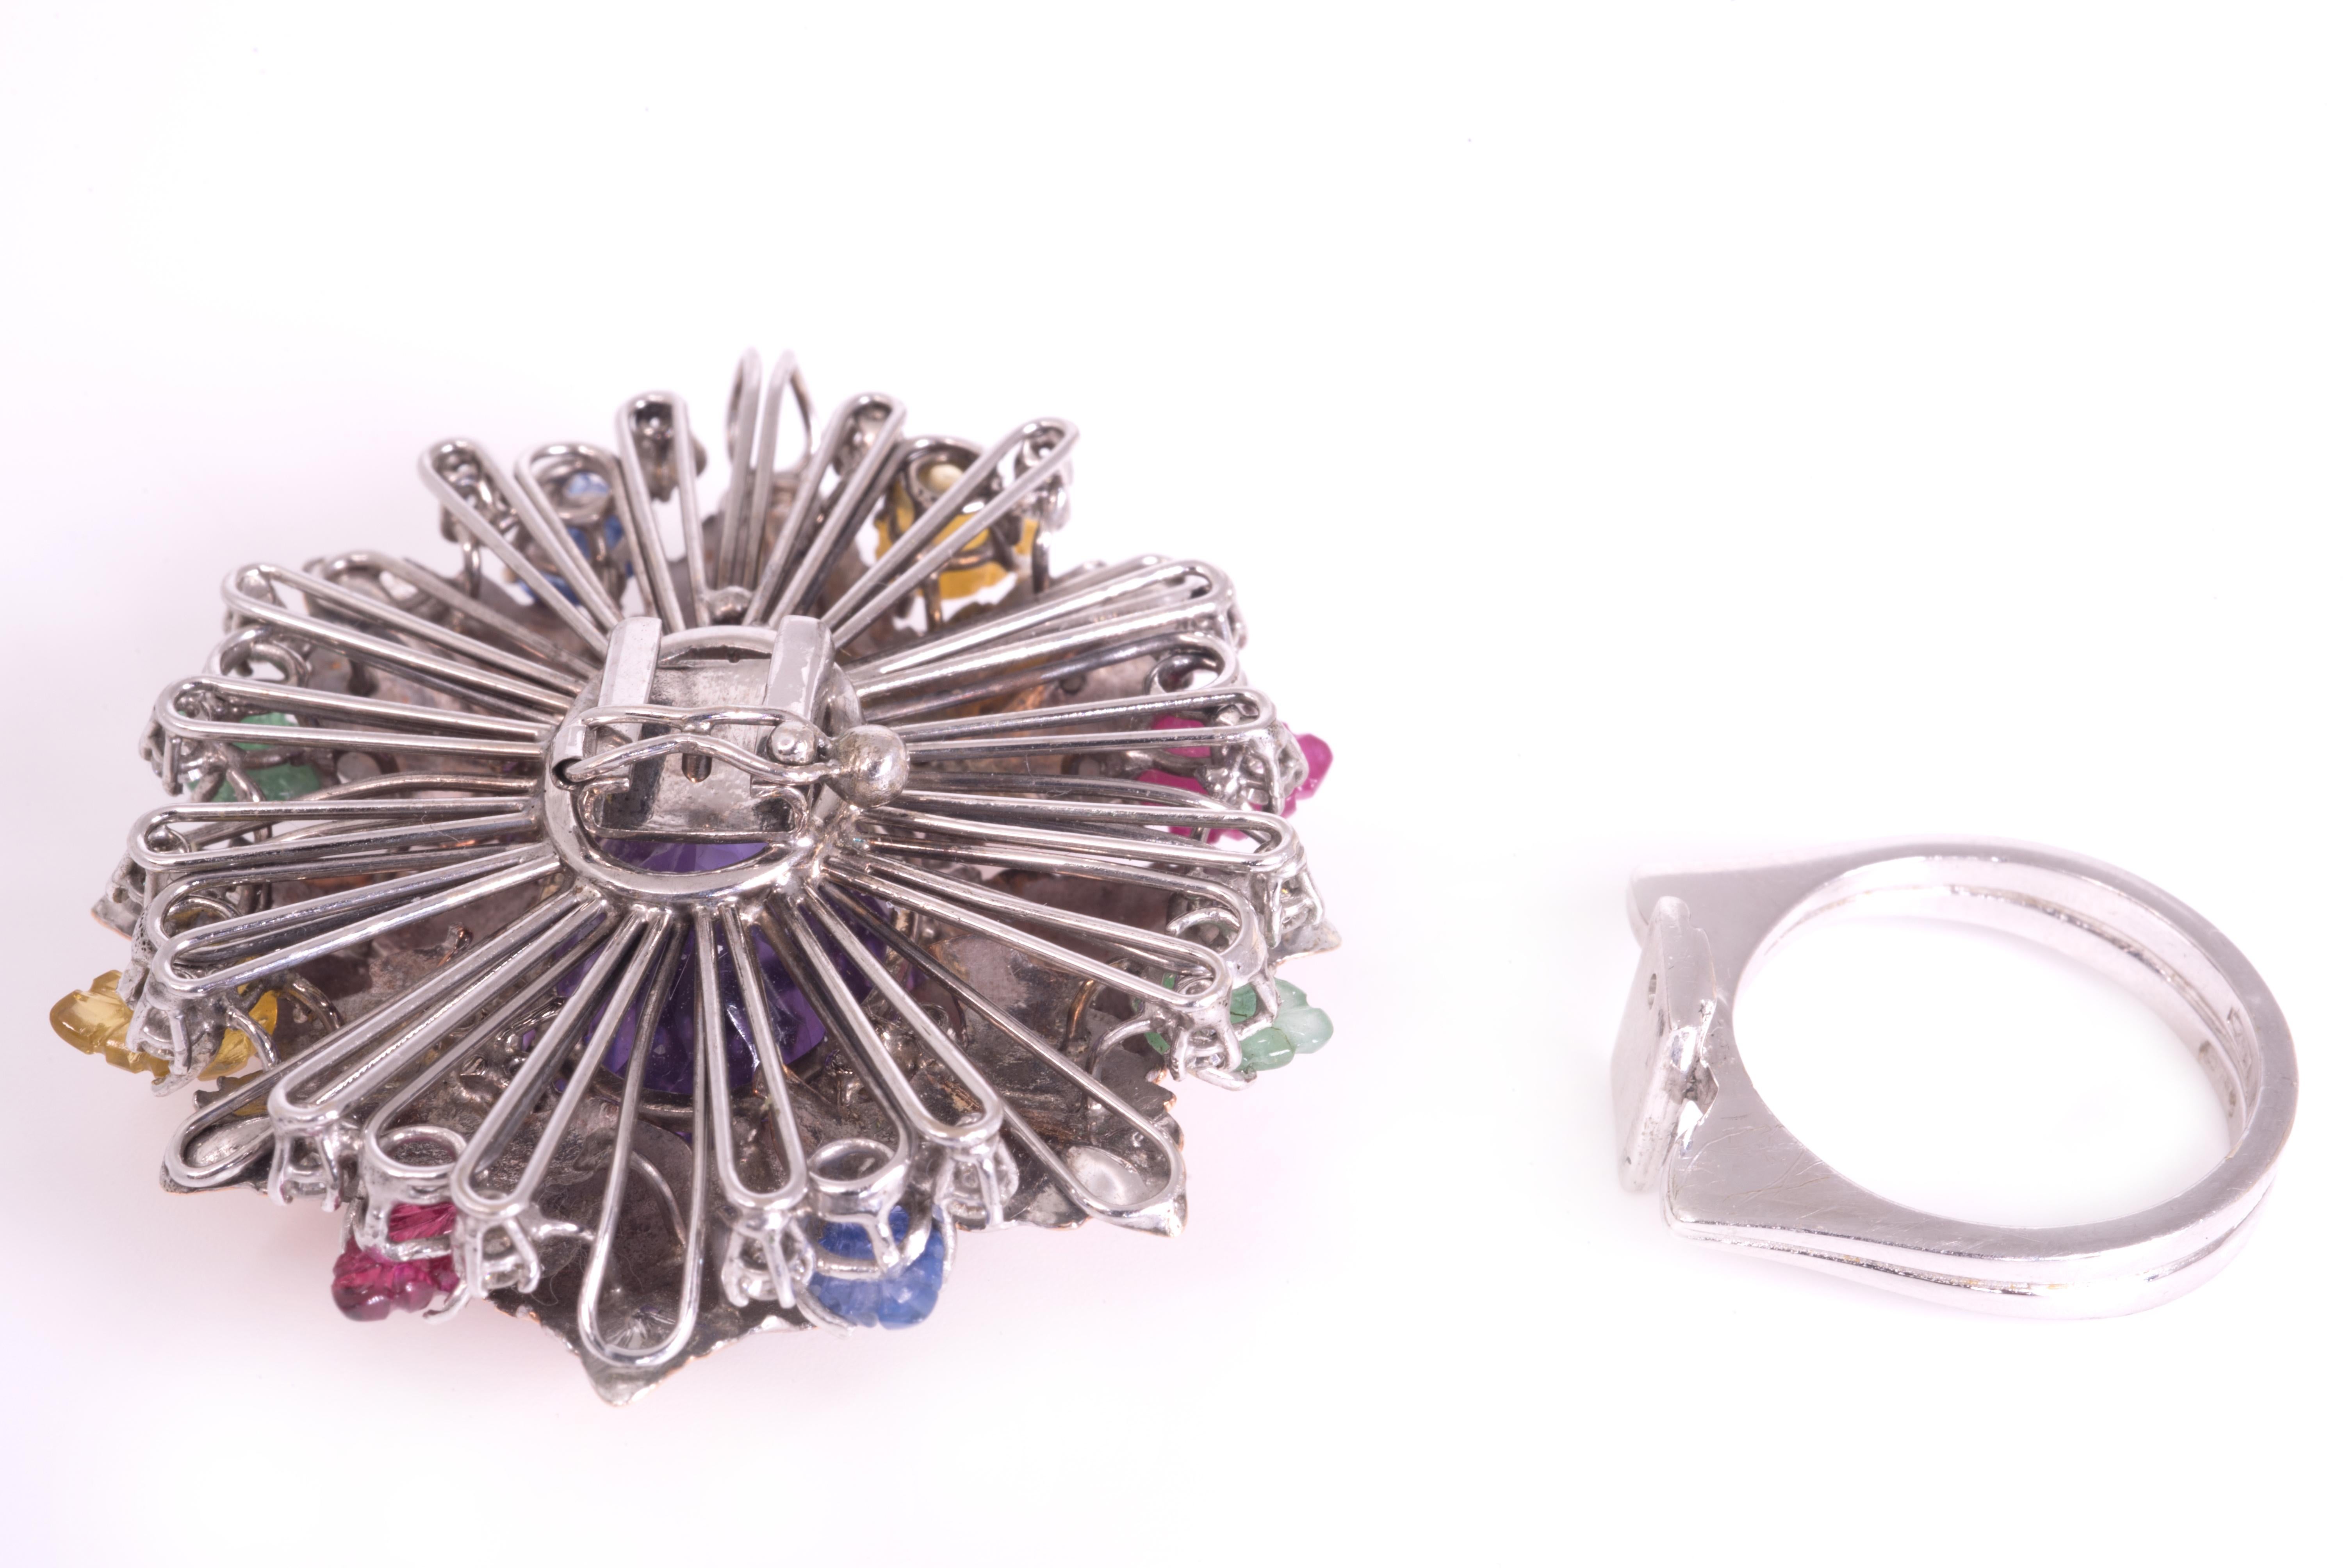 Flower ring in white and rose gold 18 kt engraved, it disassembles and becomes a pendant with brilliants ct 0,48 and leaves of sapphires ct 0,30, rubies ct 0,30, emeralds ct 0,30, yellow sapphires ct 0,30 and central oval amethyst ct 14